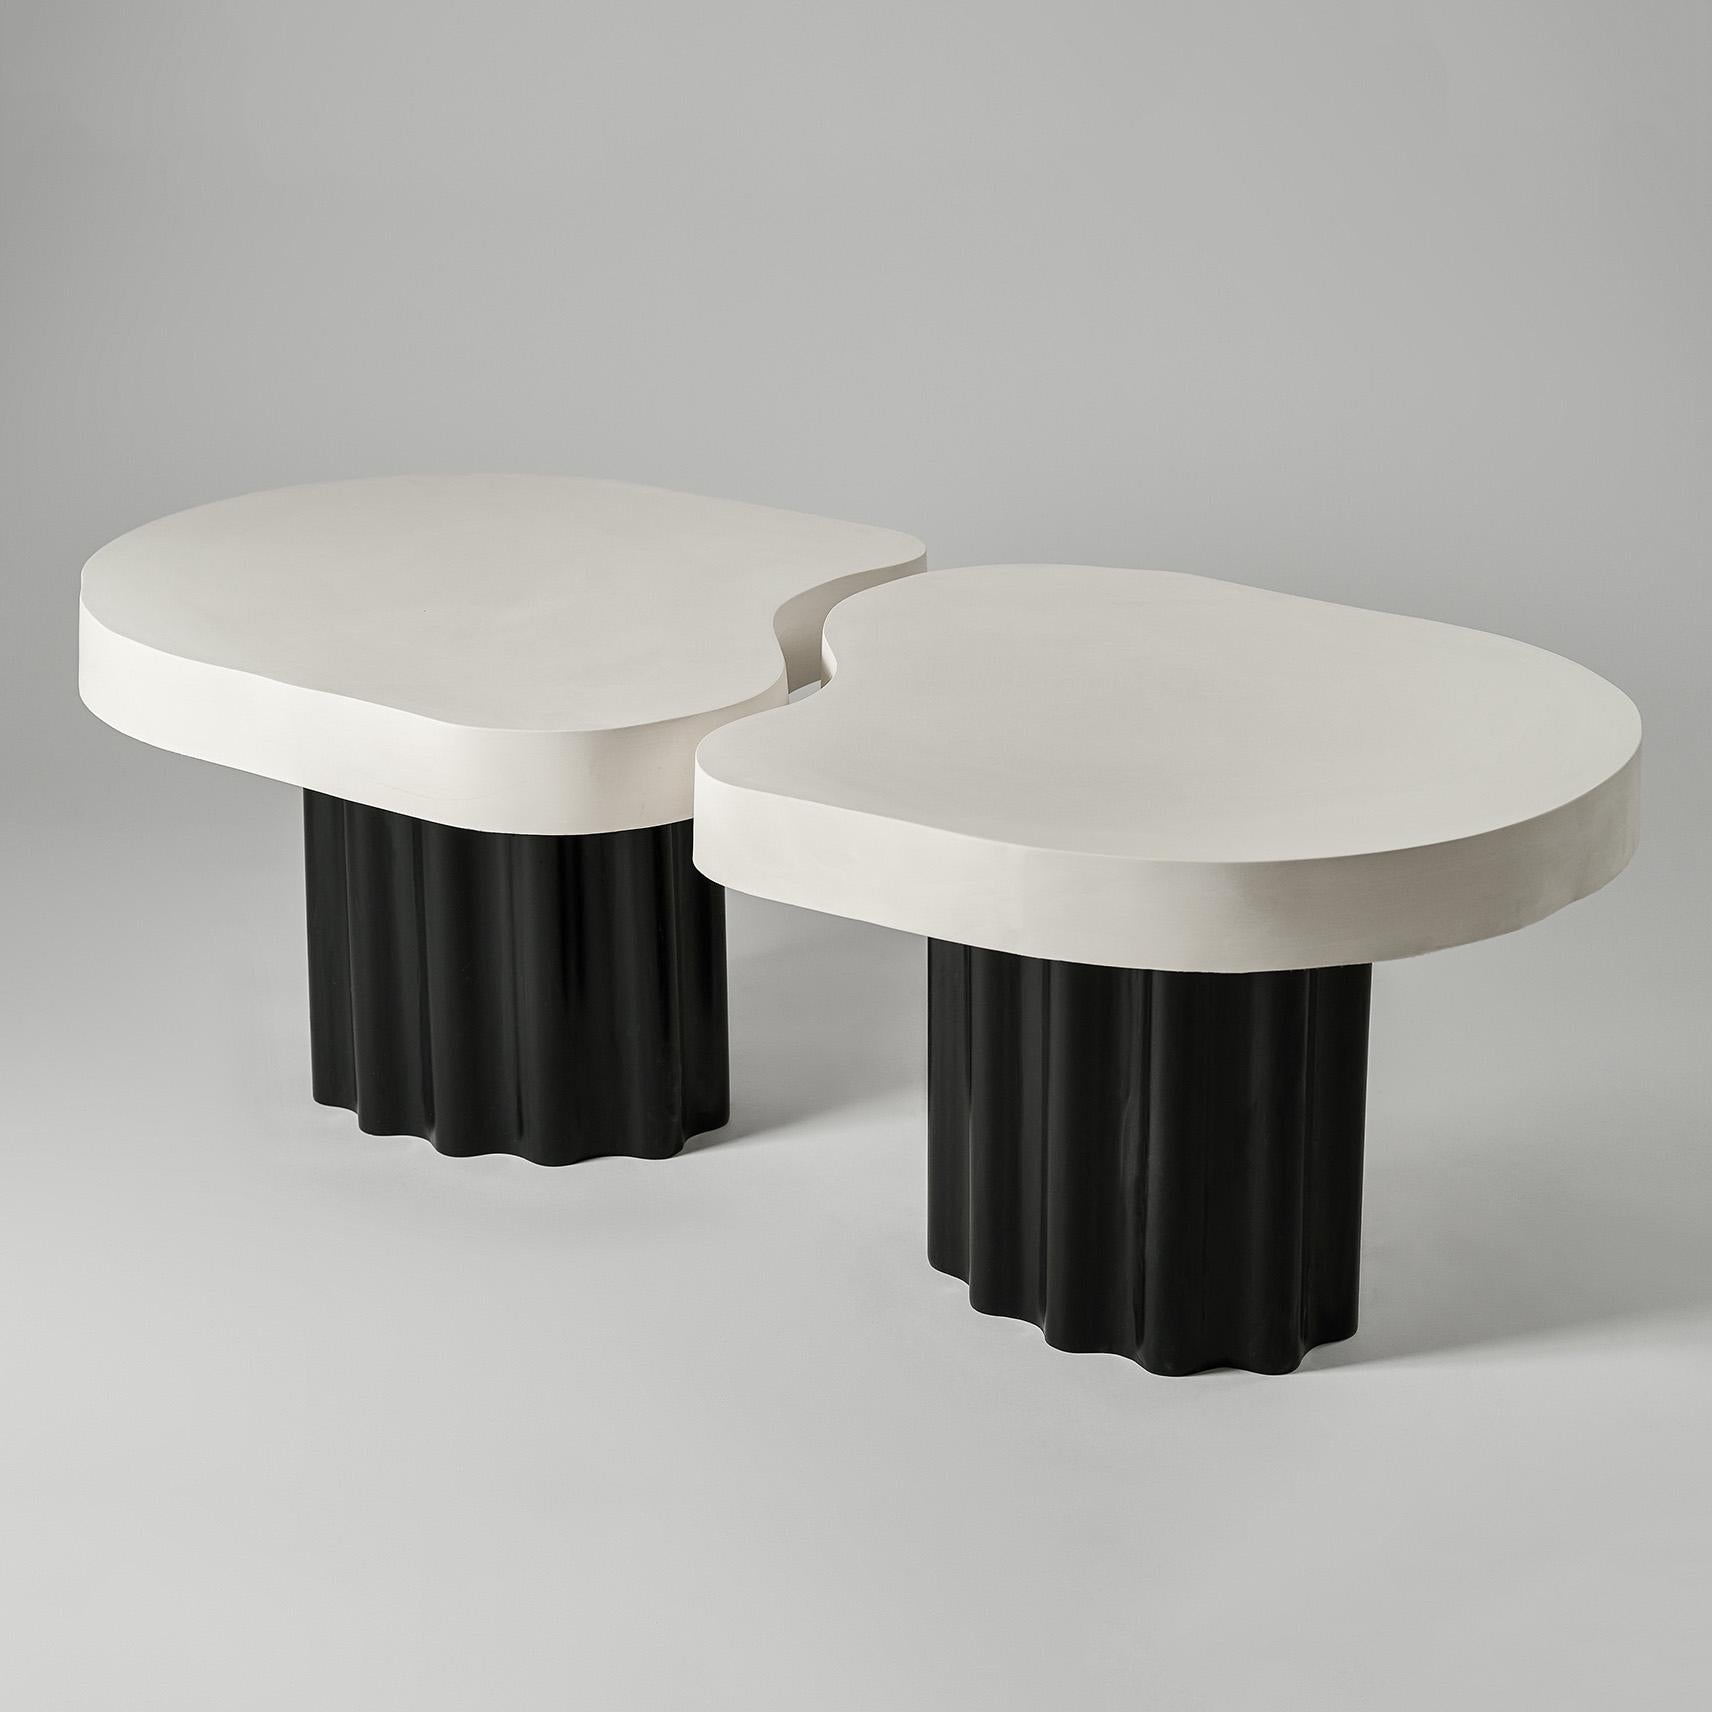 Set of 2 Organic Edge No. 2 Coffee Tables by Perler
Dimensions: One table: D 56 x W 65 x H 40 cm.
Both tables: D 58 x W 120 x H 40 cm.
Materials: Jesmonite.
Weight of a single table: 15-20 kg.

The height of these tables is customizable. Please